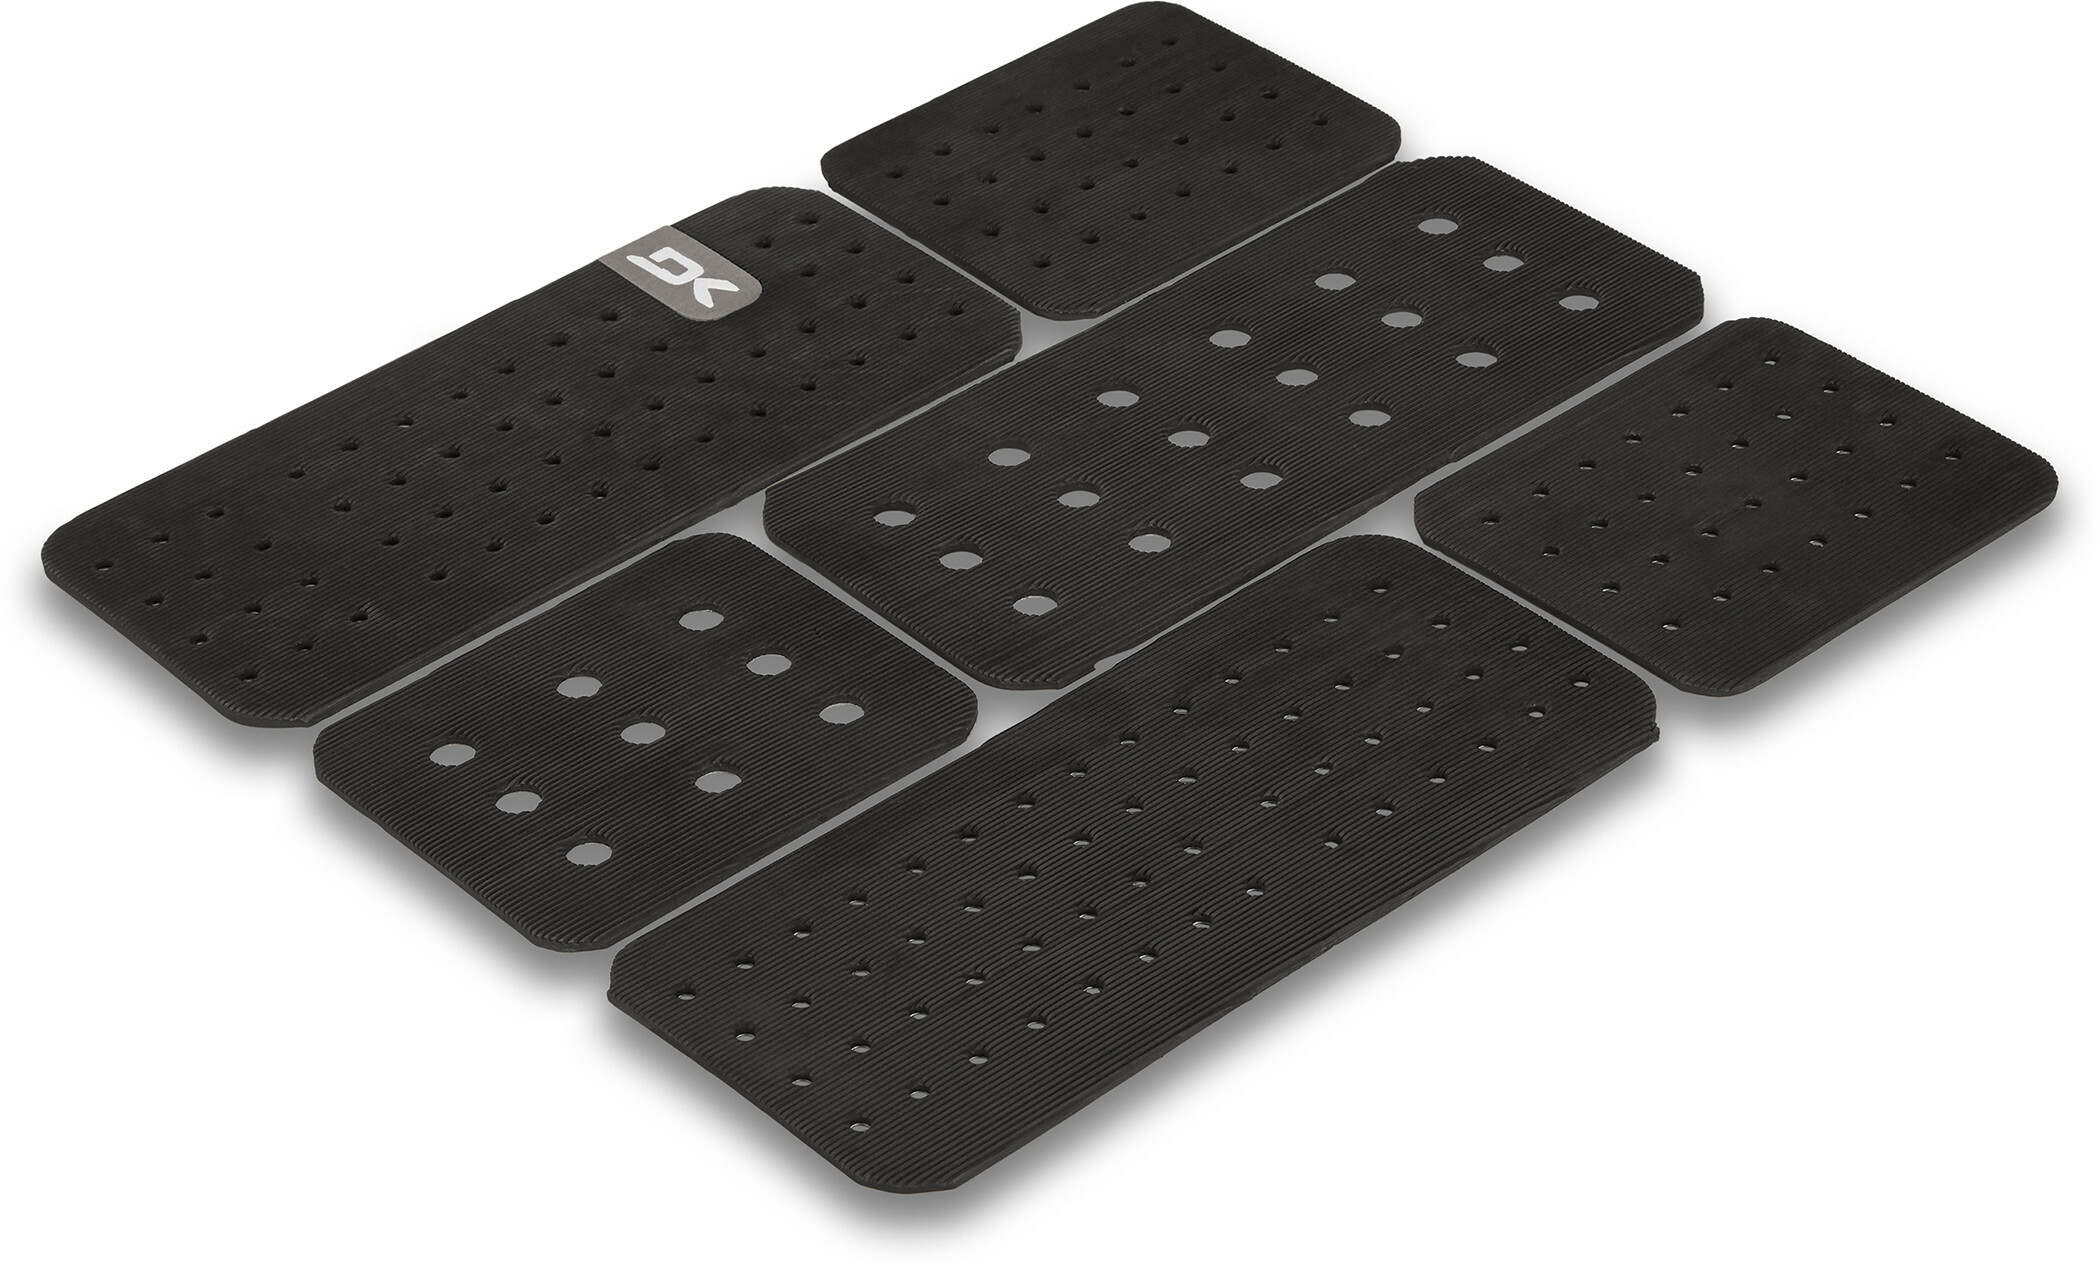 FRONT FOOT SURF TRACTION PAD